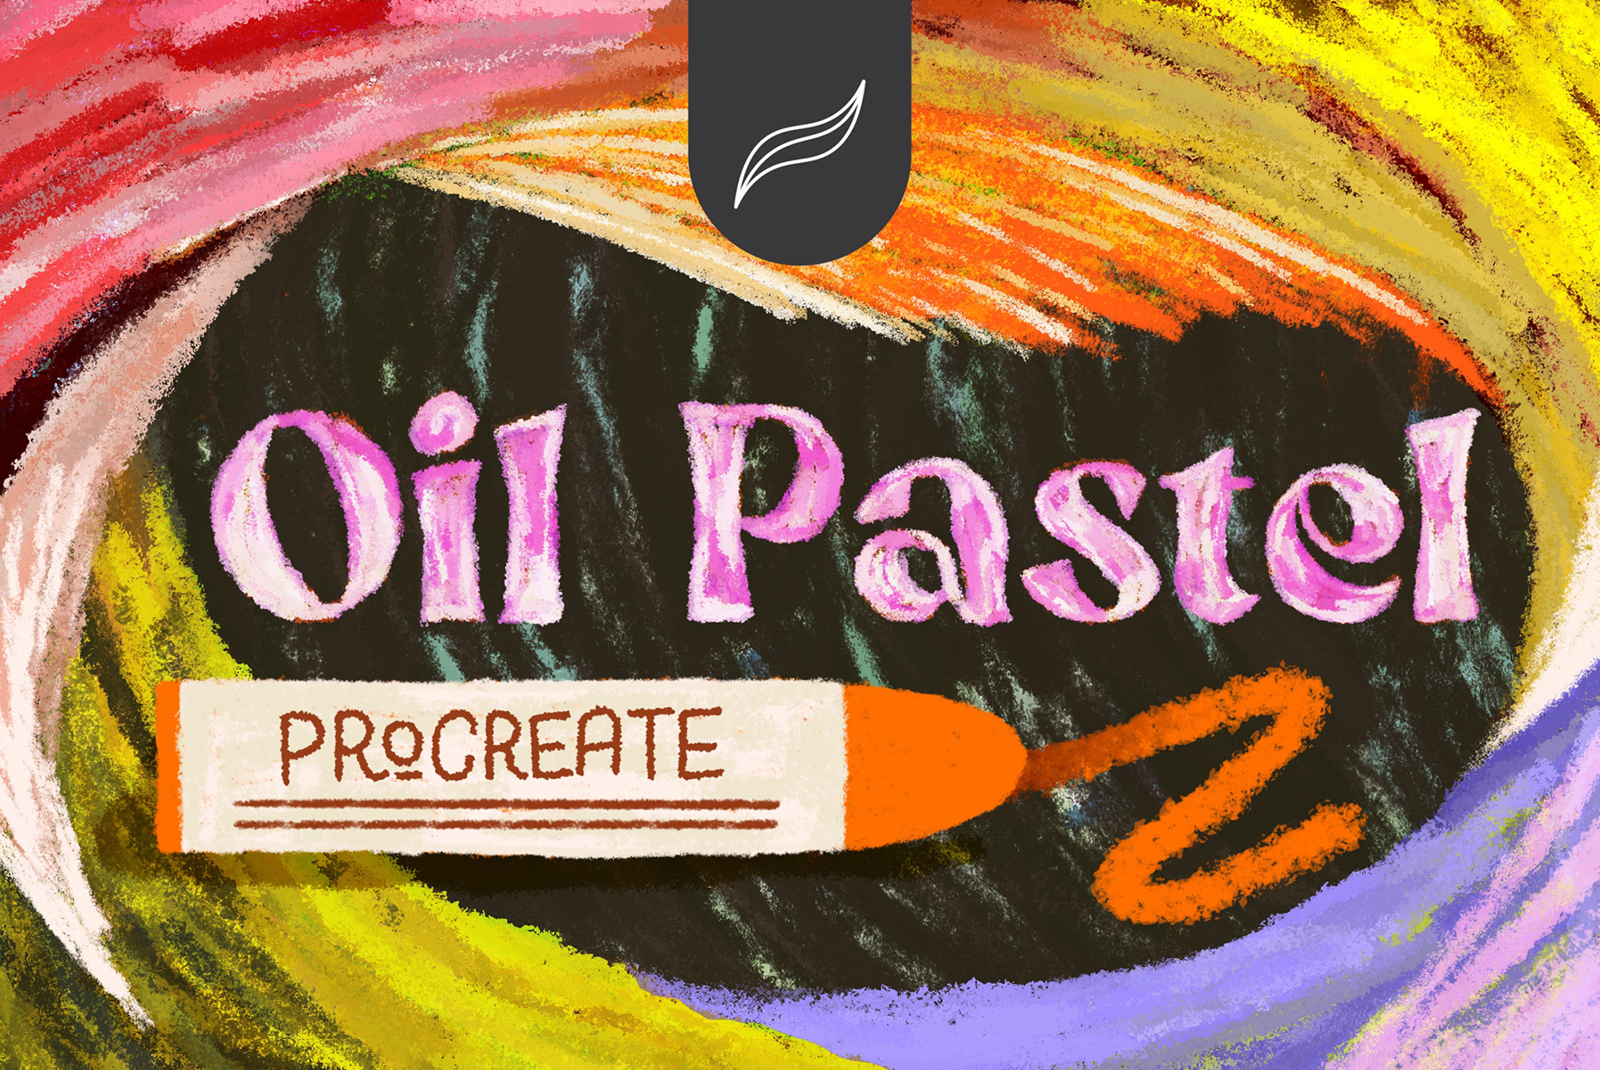 Colorful oil pastel brush pack promo for Procreate app displayed on a rainbow-hued background, digital art, creative tool, design asset.